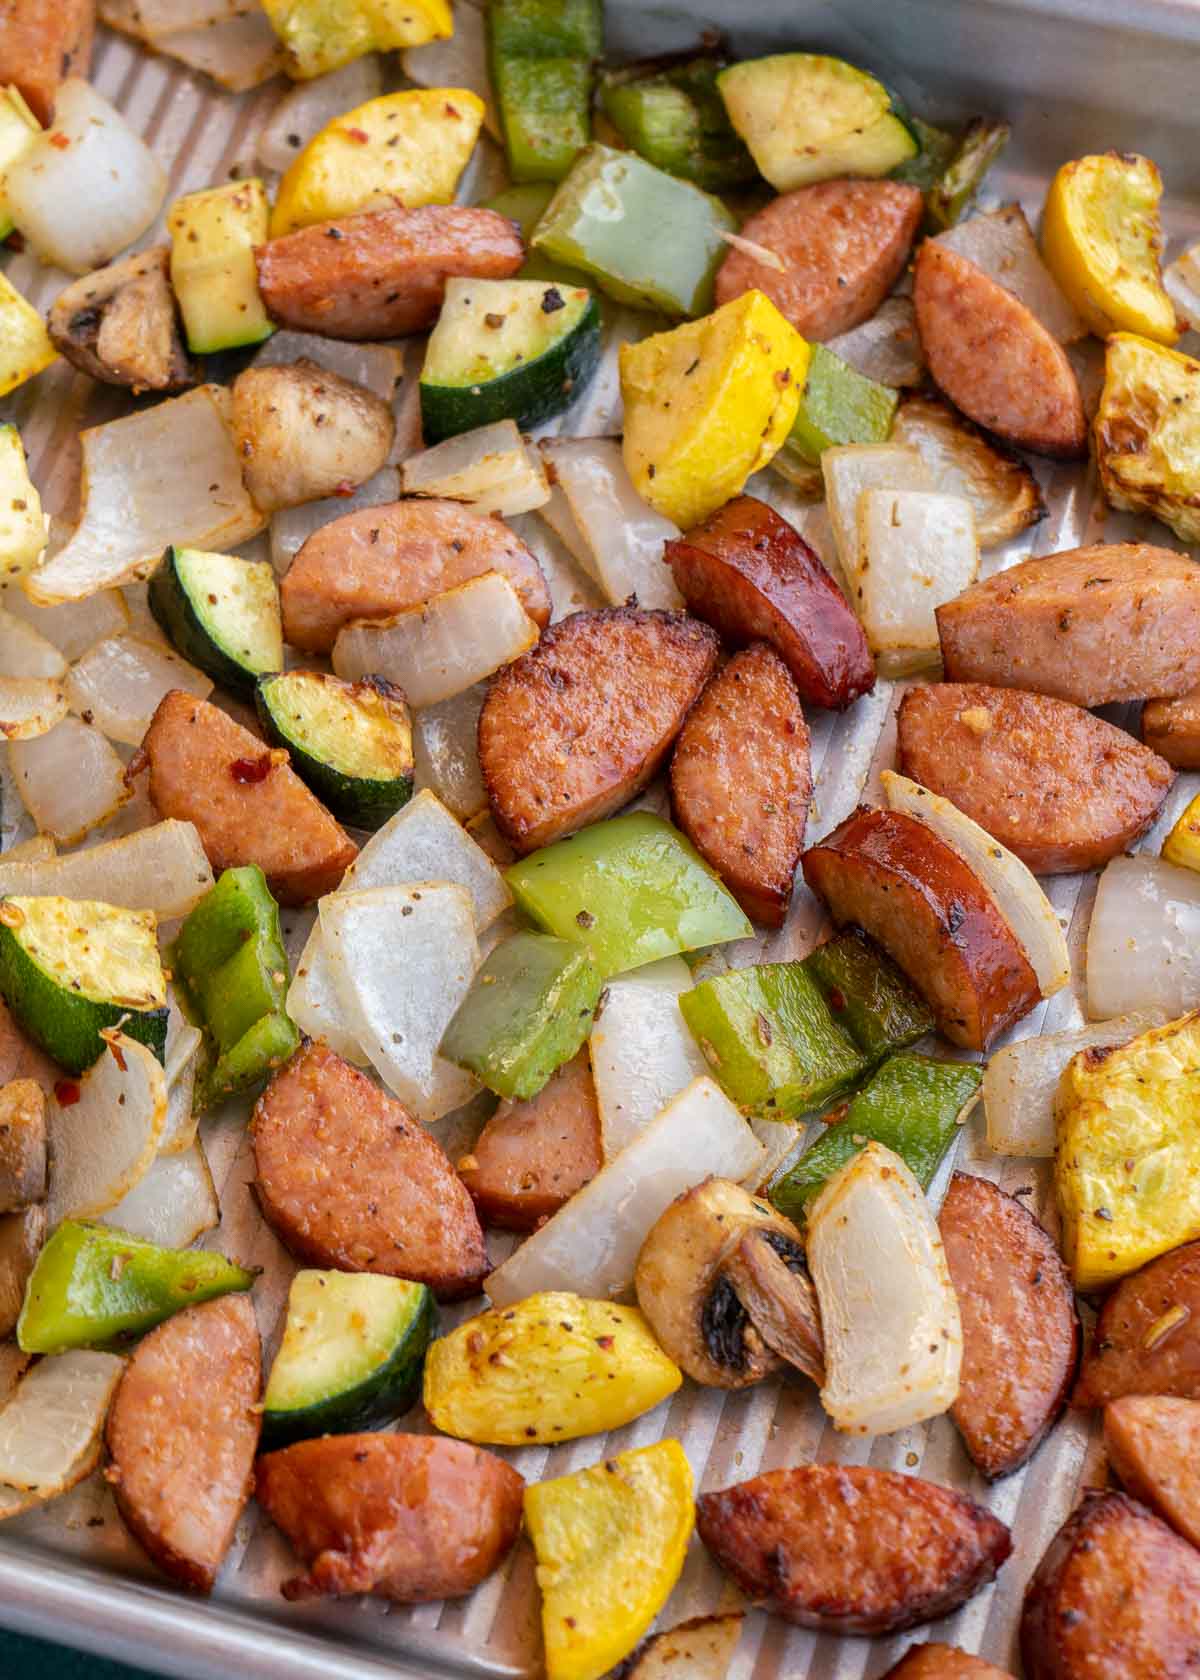 cooked sausage and vegetables